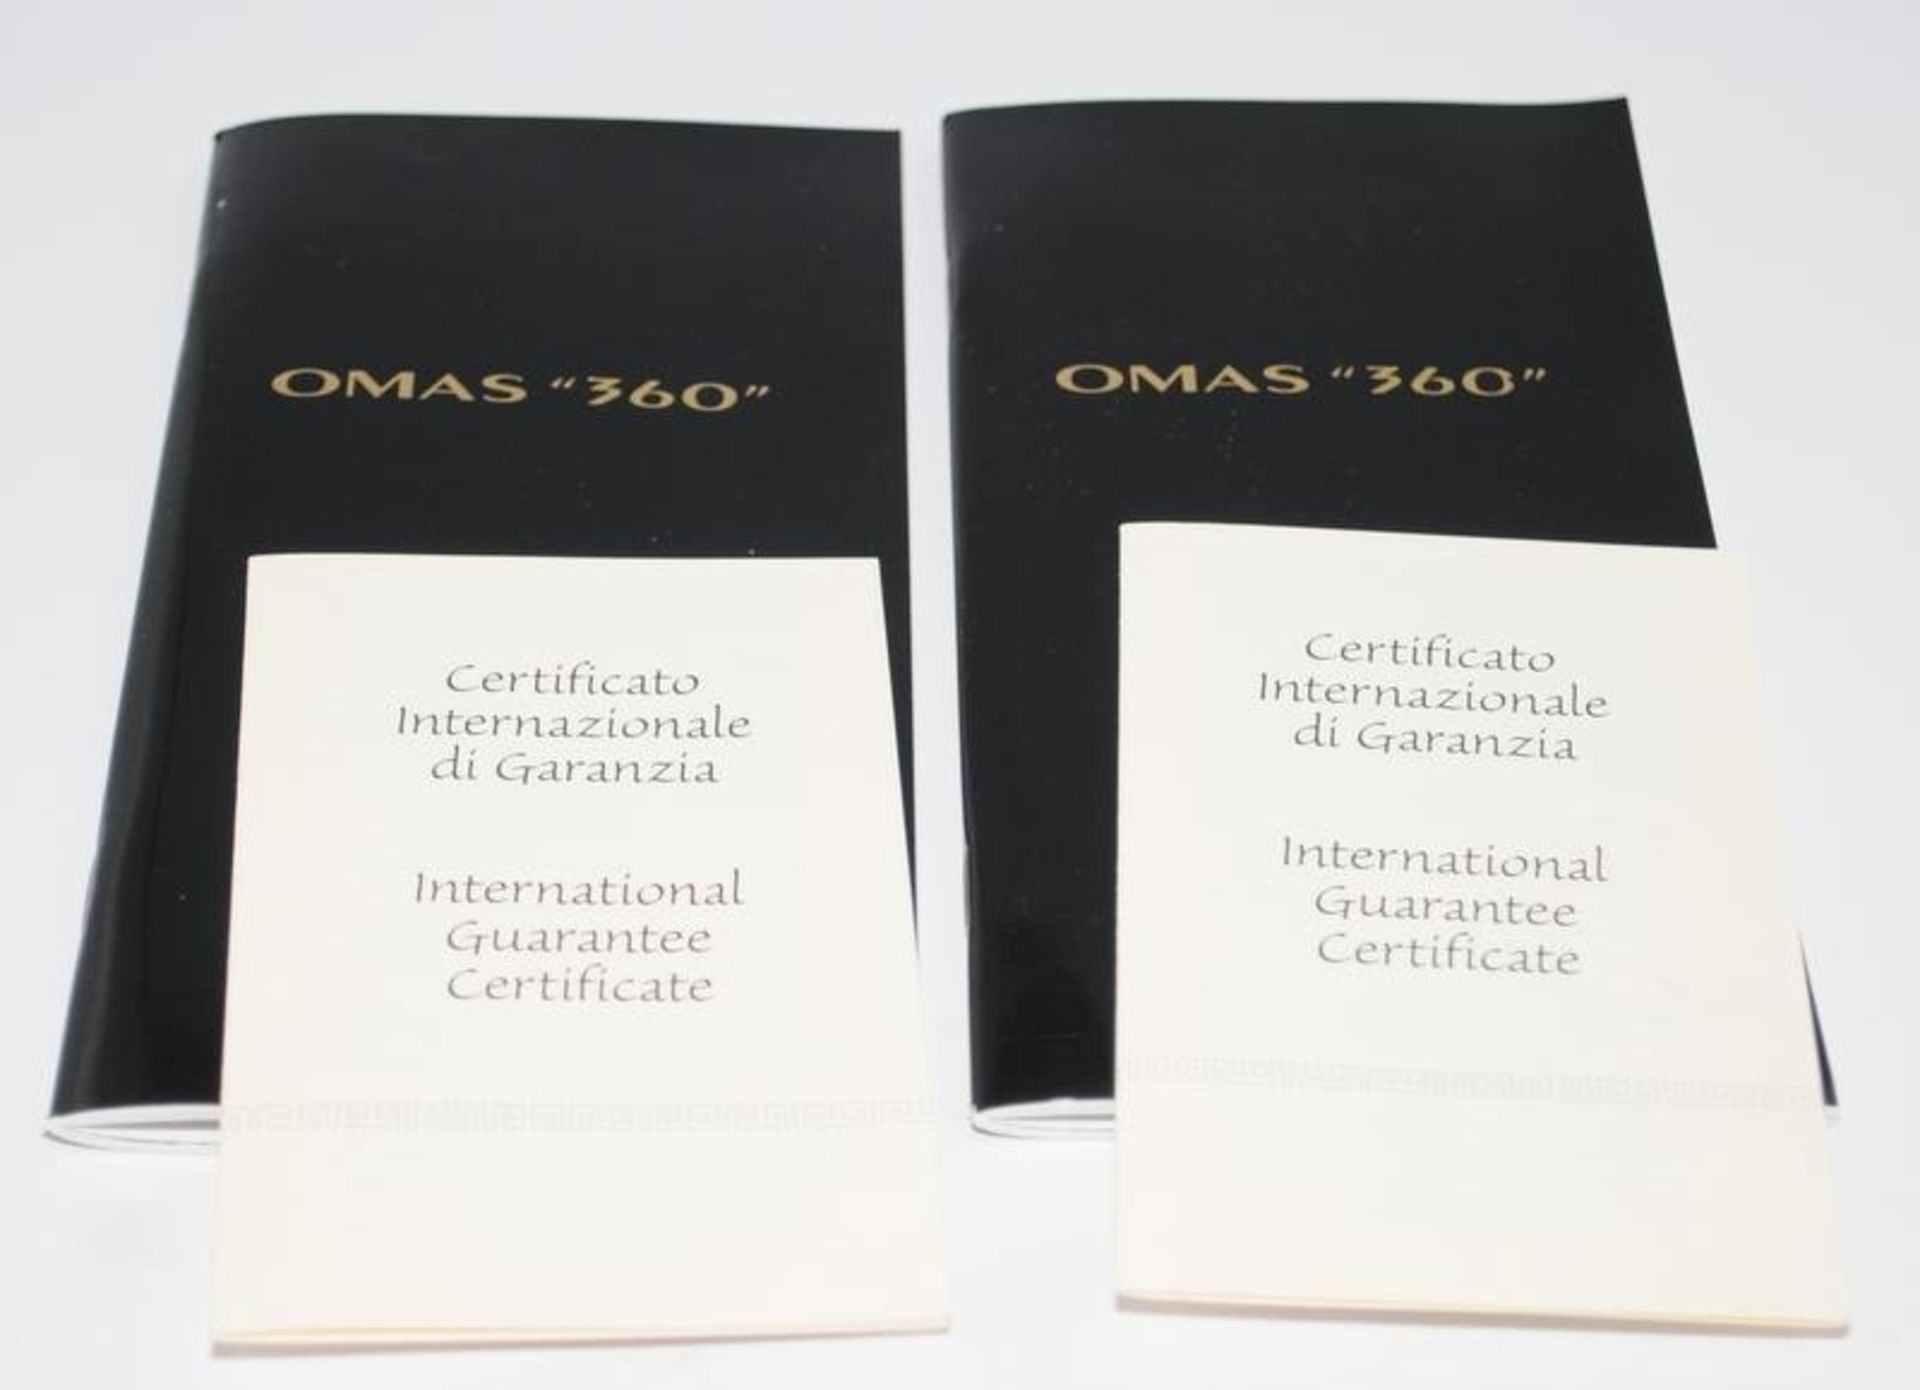 Two genuine Omas 360 pen boxes complete with certificates and user guides - Image 3 of 3